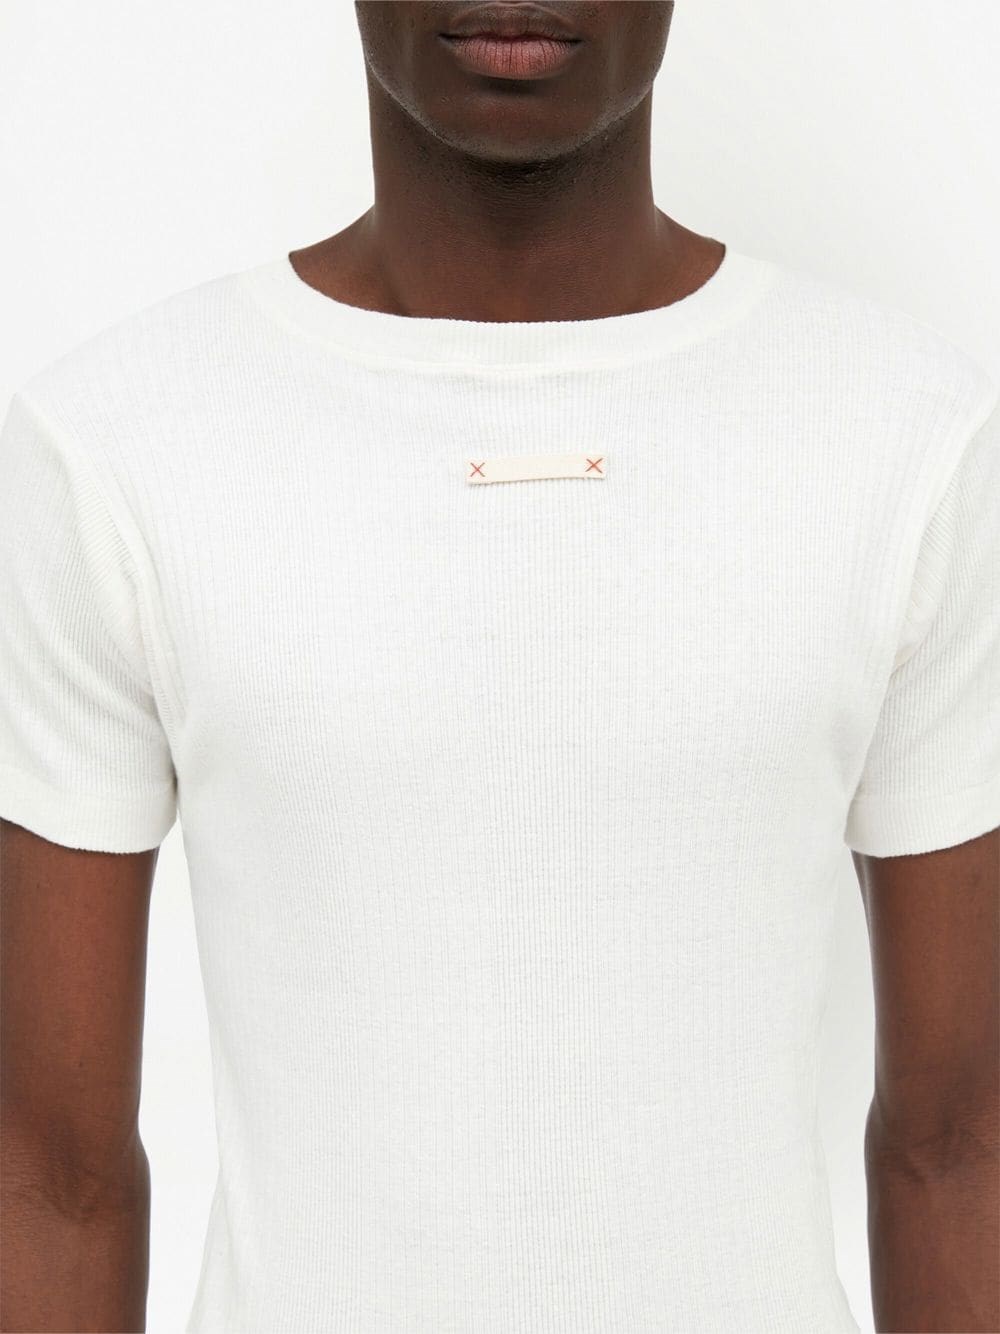 maison margiela T-shirt with application available on 